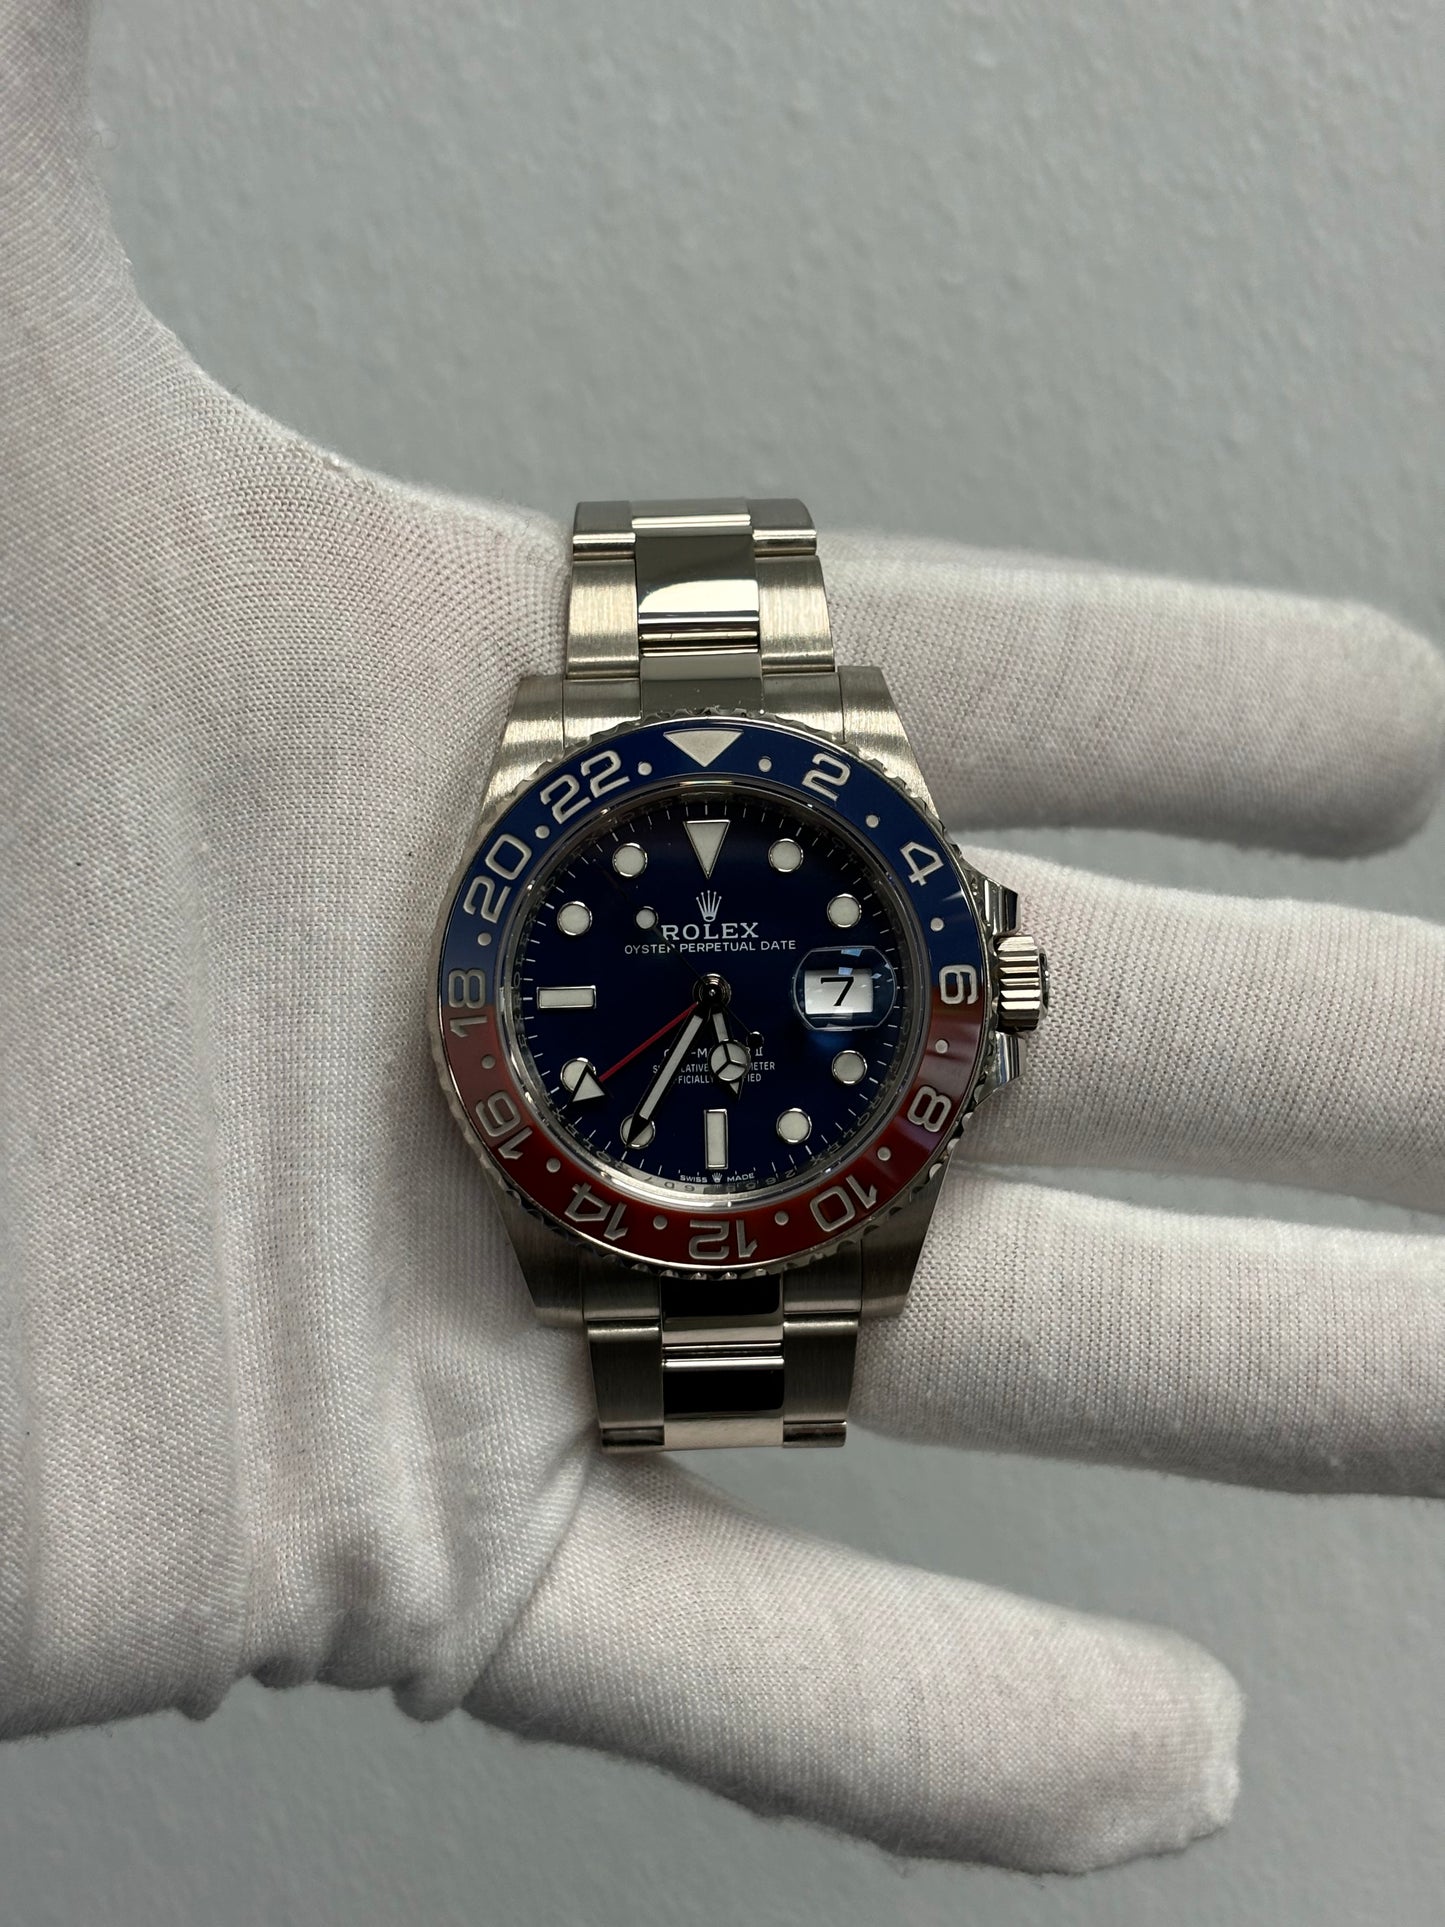 Rolex GMT Master II "Pepsi" White Gold 40mm Blue Dot Dial Watch Reference# 126719BLRO